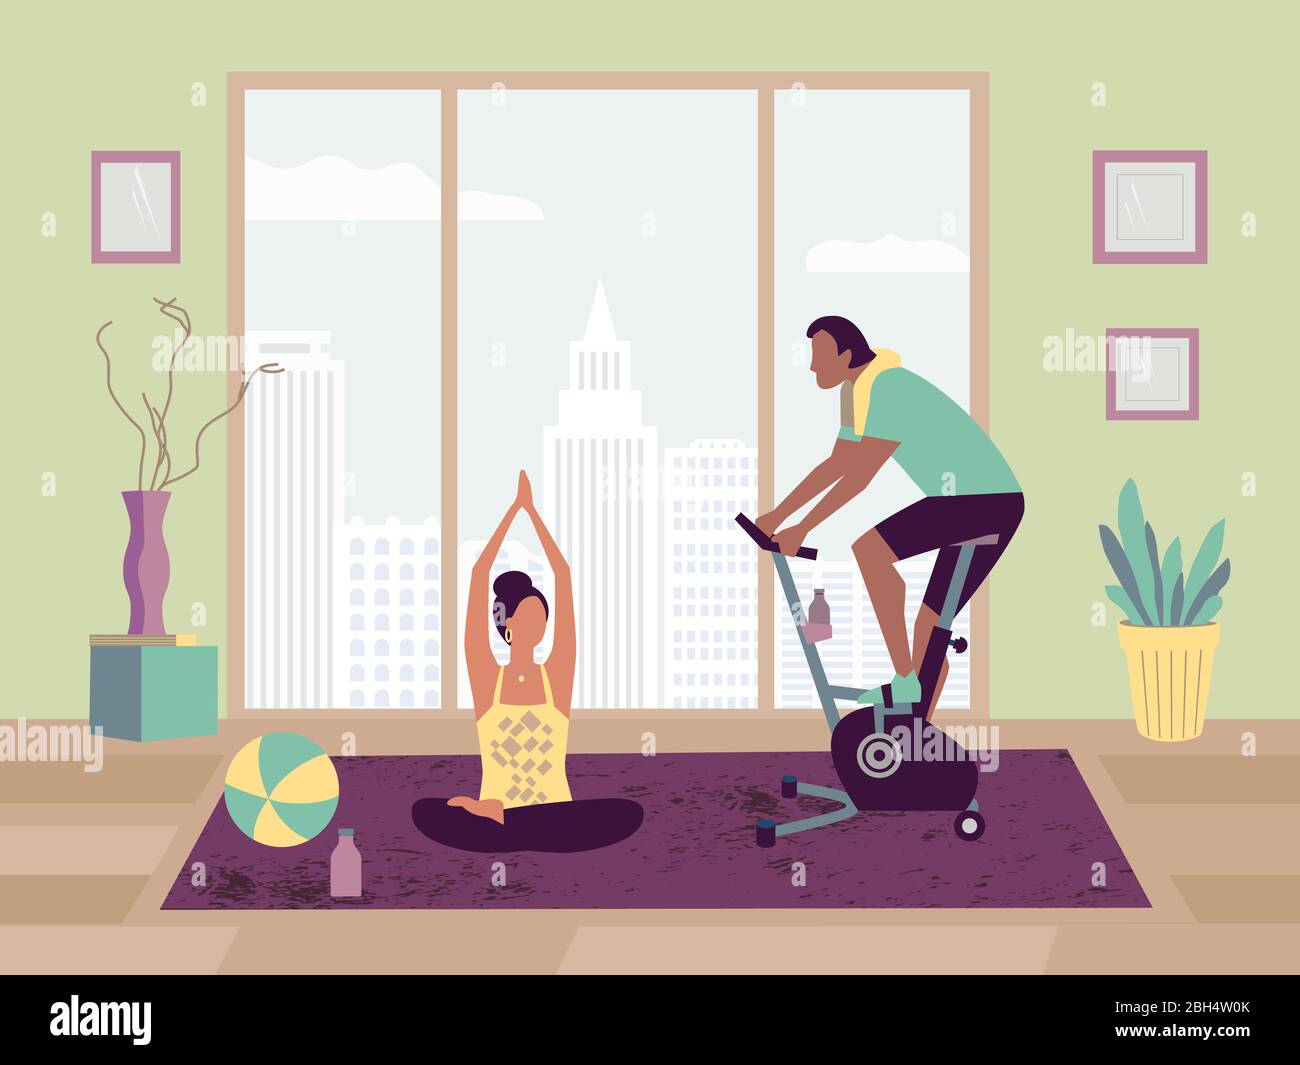 Couple sport activity at home flat vector. Stay home yoga practice bicycle riding cartoon. Breathing exercise workout background. Healthy lifestyle Stock Vector